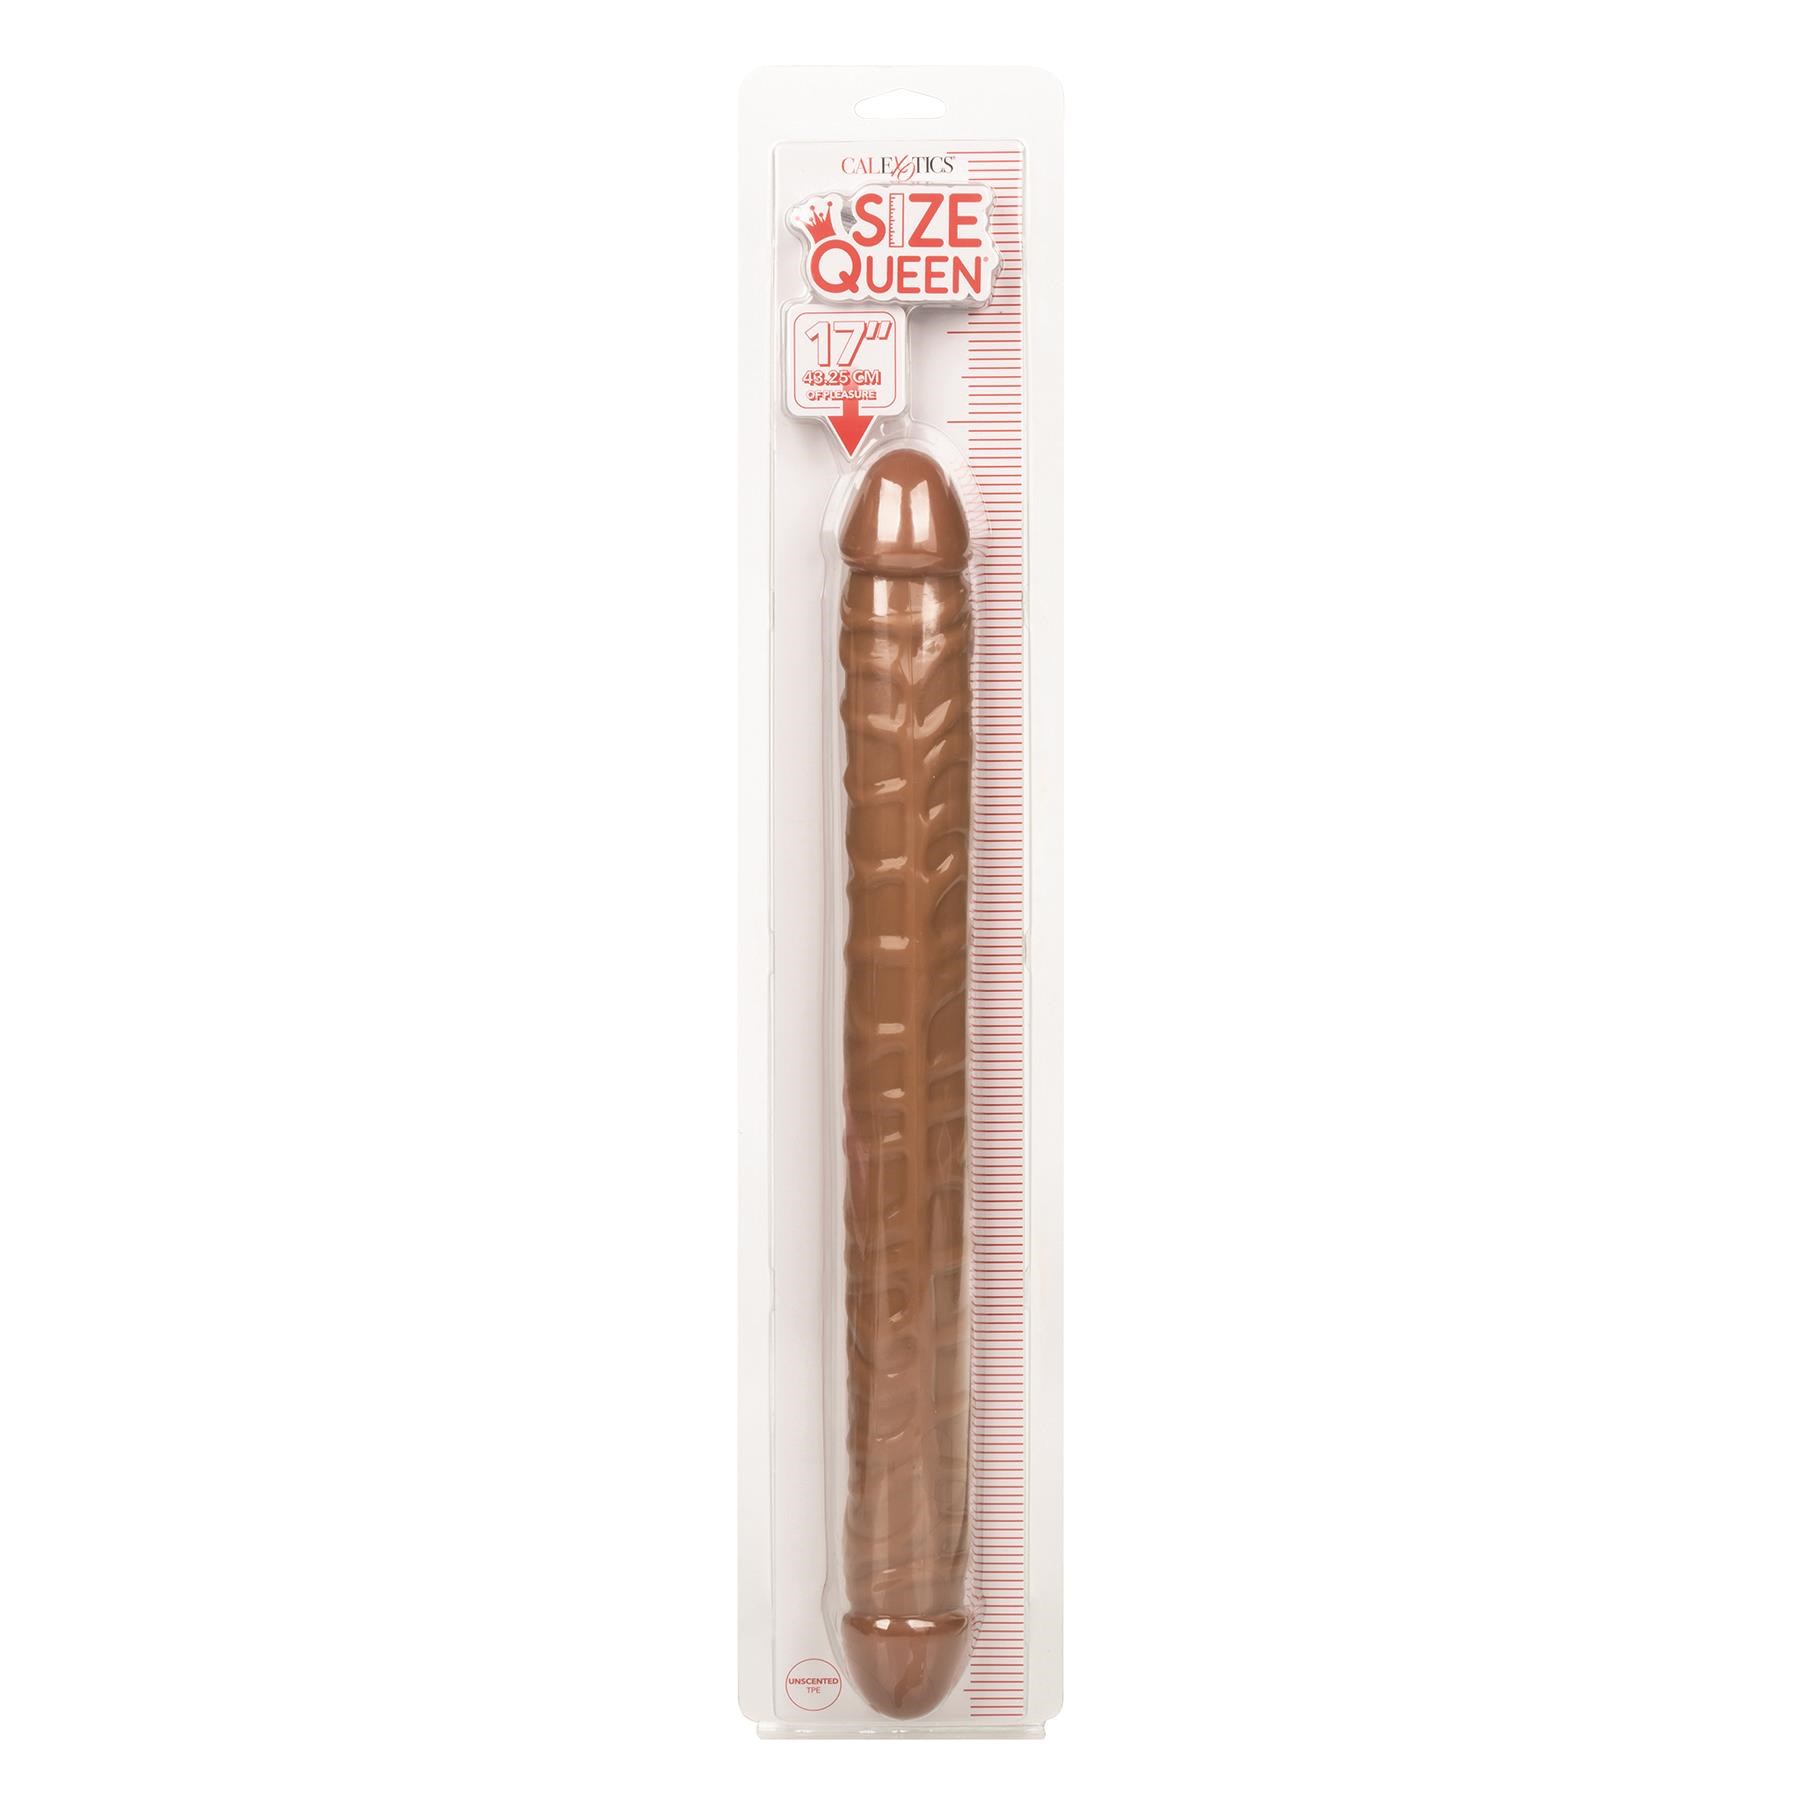 Size Queen 17 Inch Double Dong - Packaging Shot - Brown